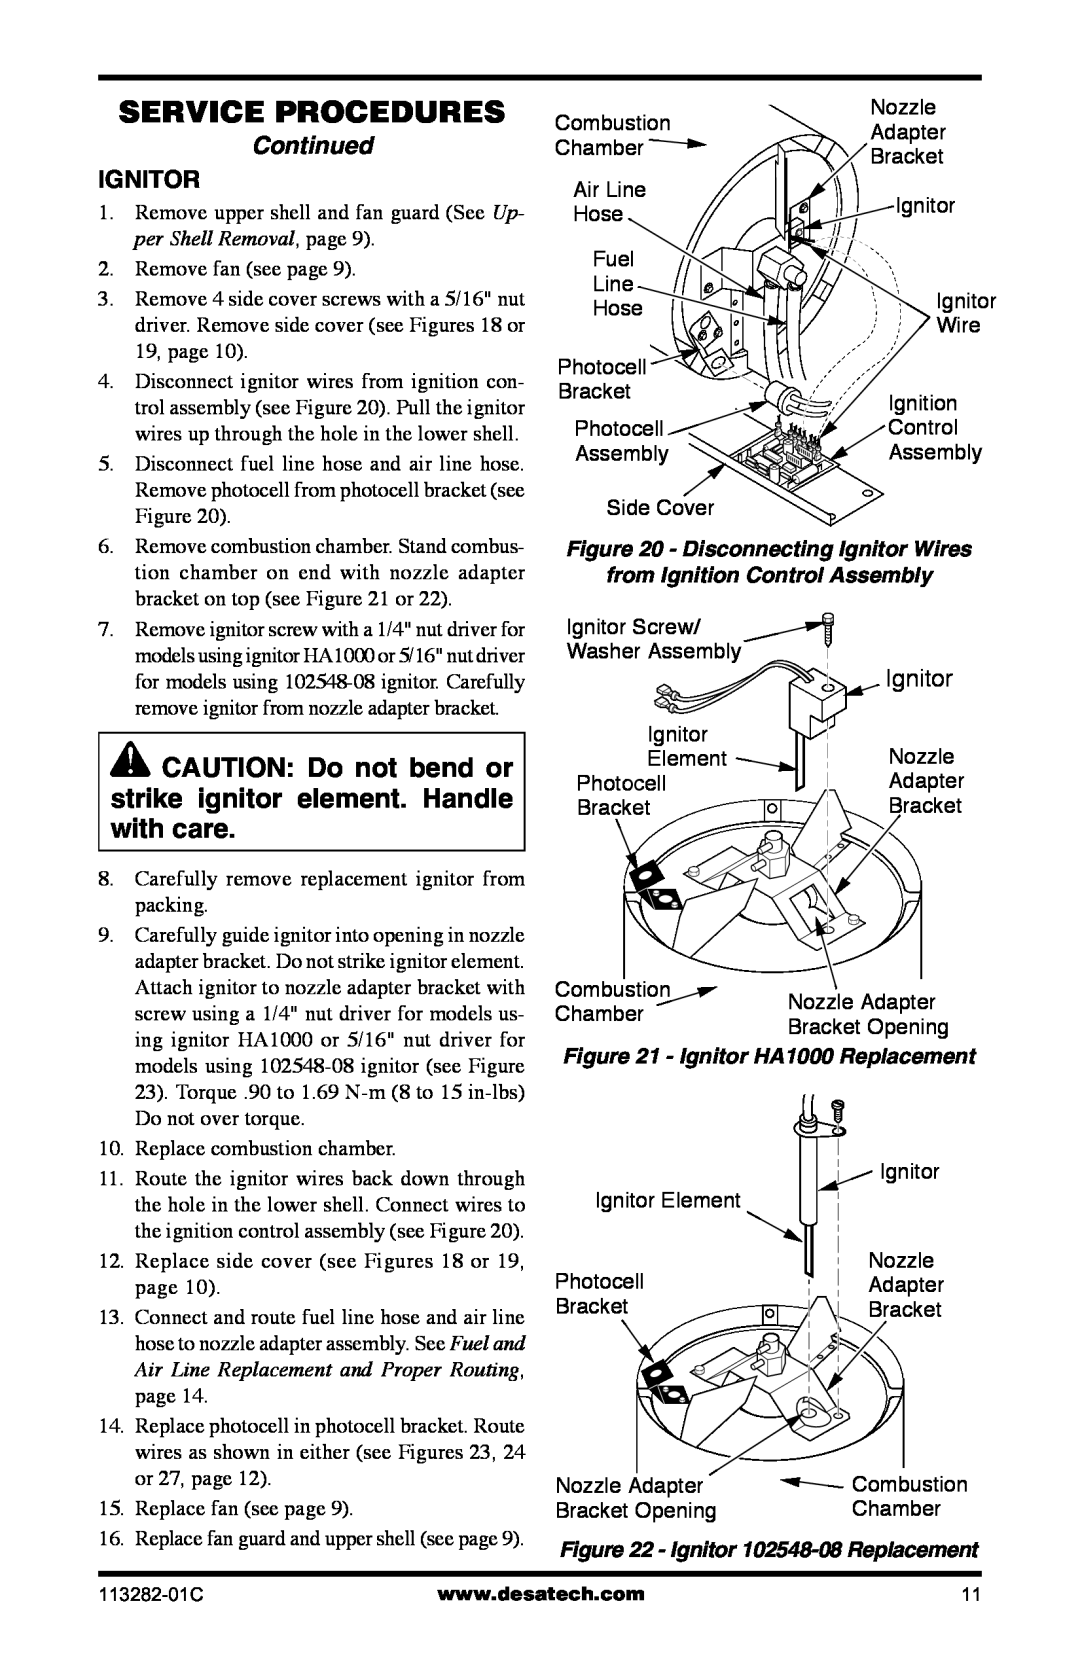 Desa BTU/HR owner manual Service Procedures, Continued, Disconnecting Ignitor Wires, from Ignition Control Assembly 